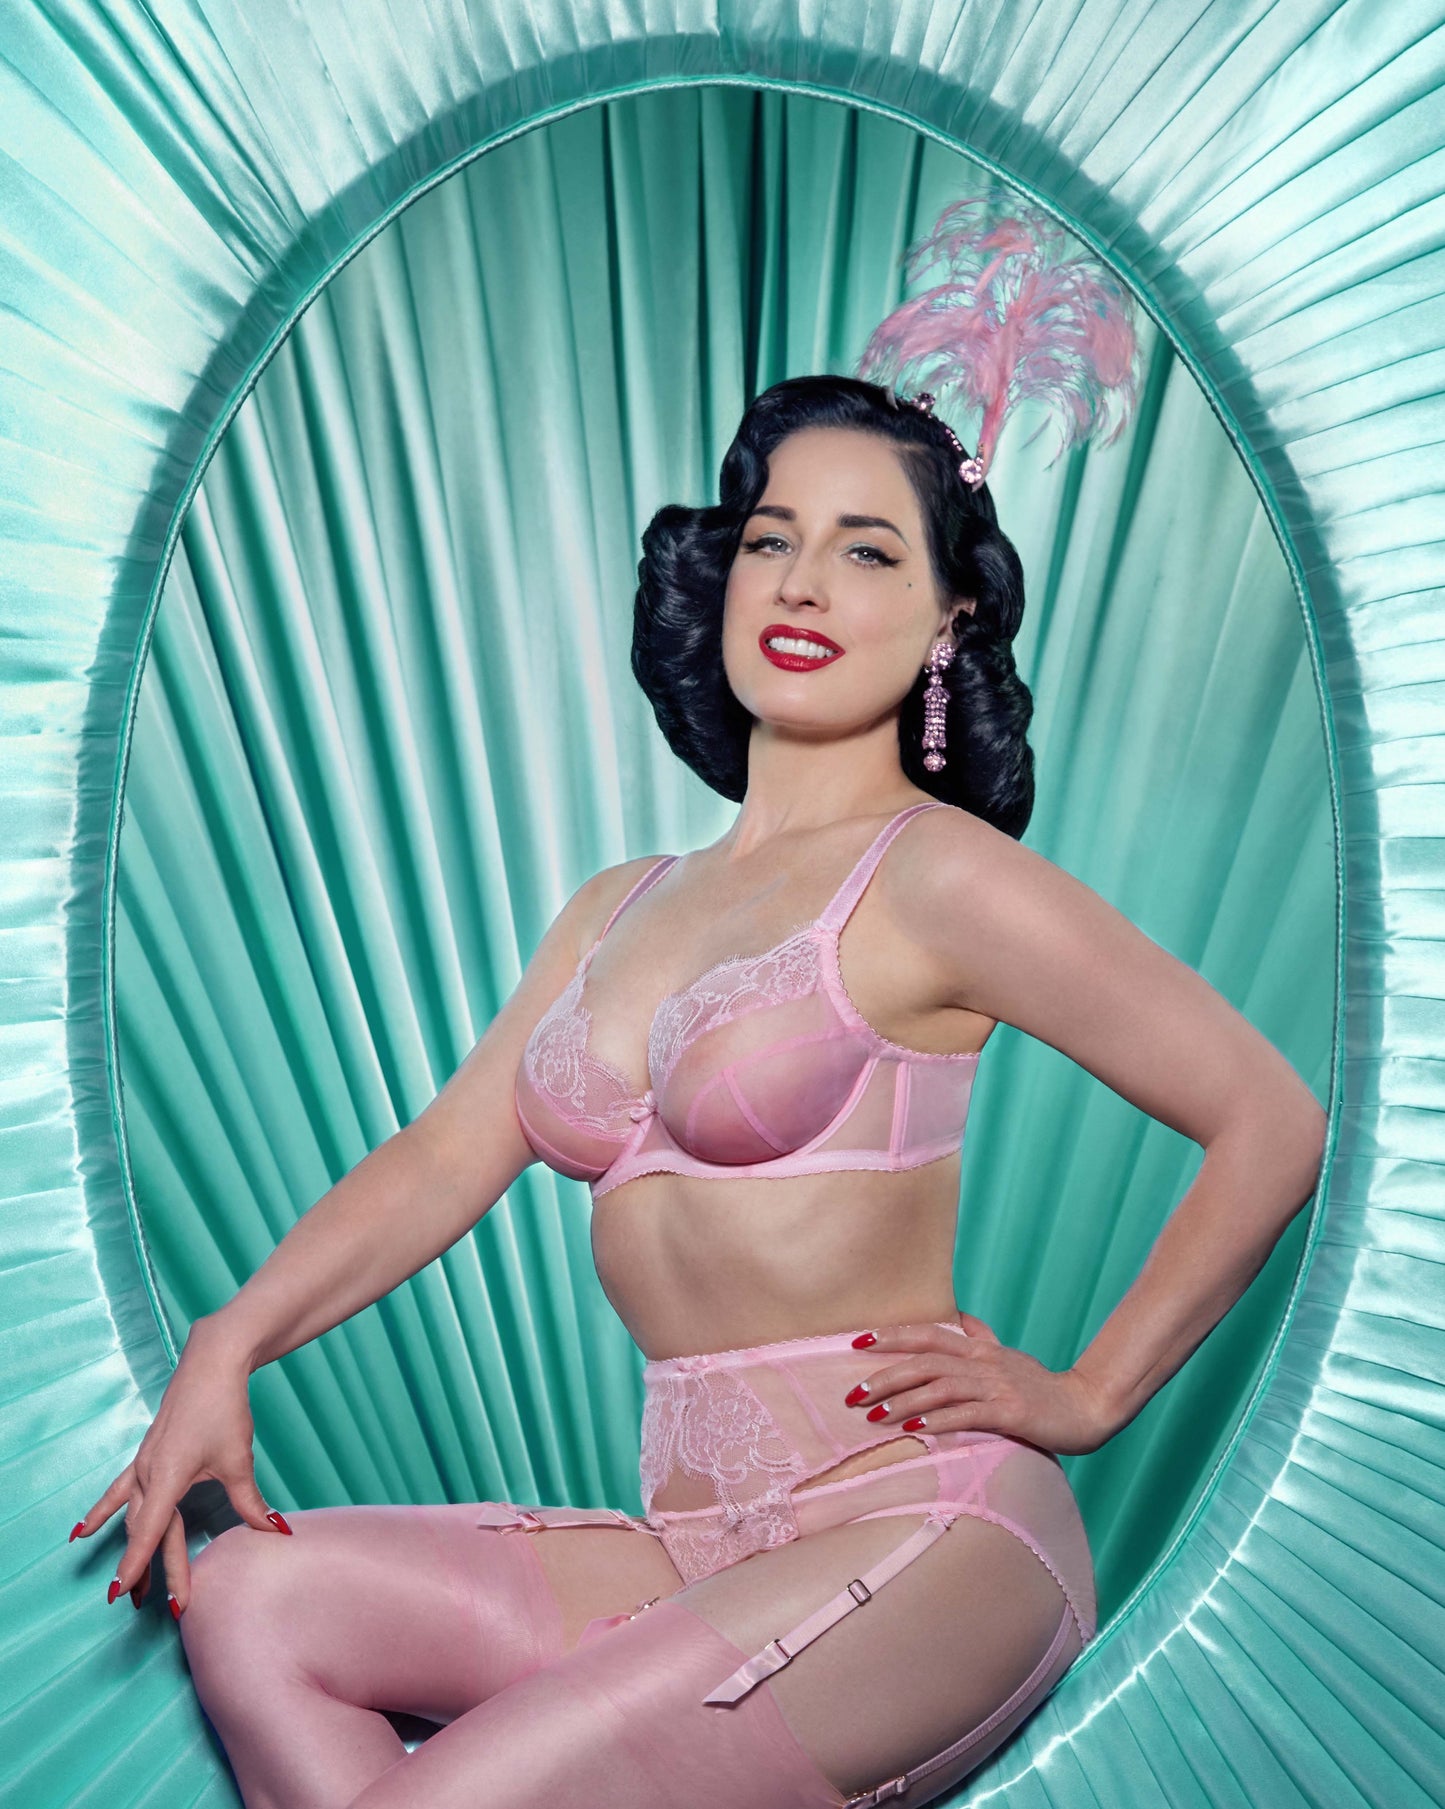 Muse Thong in Cameo Pink By Dita Von Teese - sizes XS-L